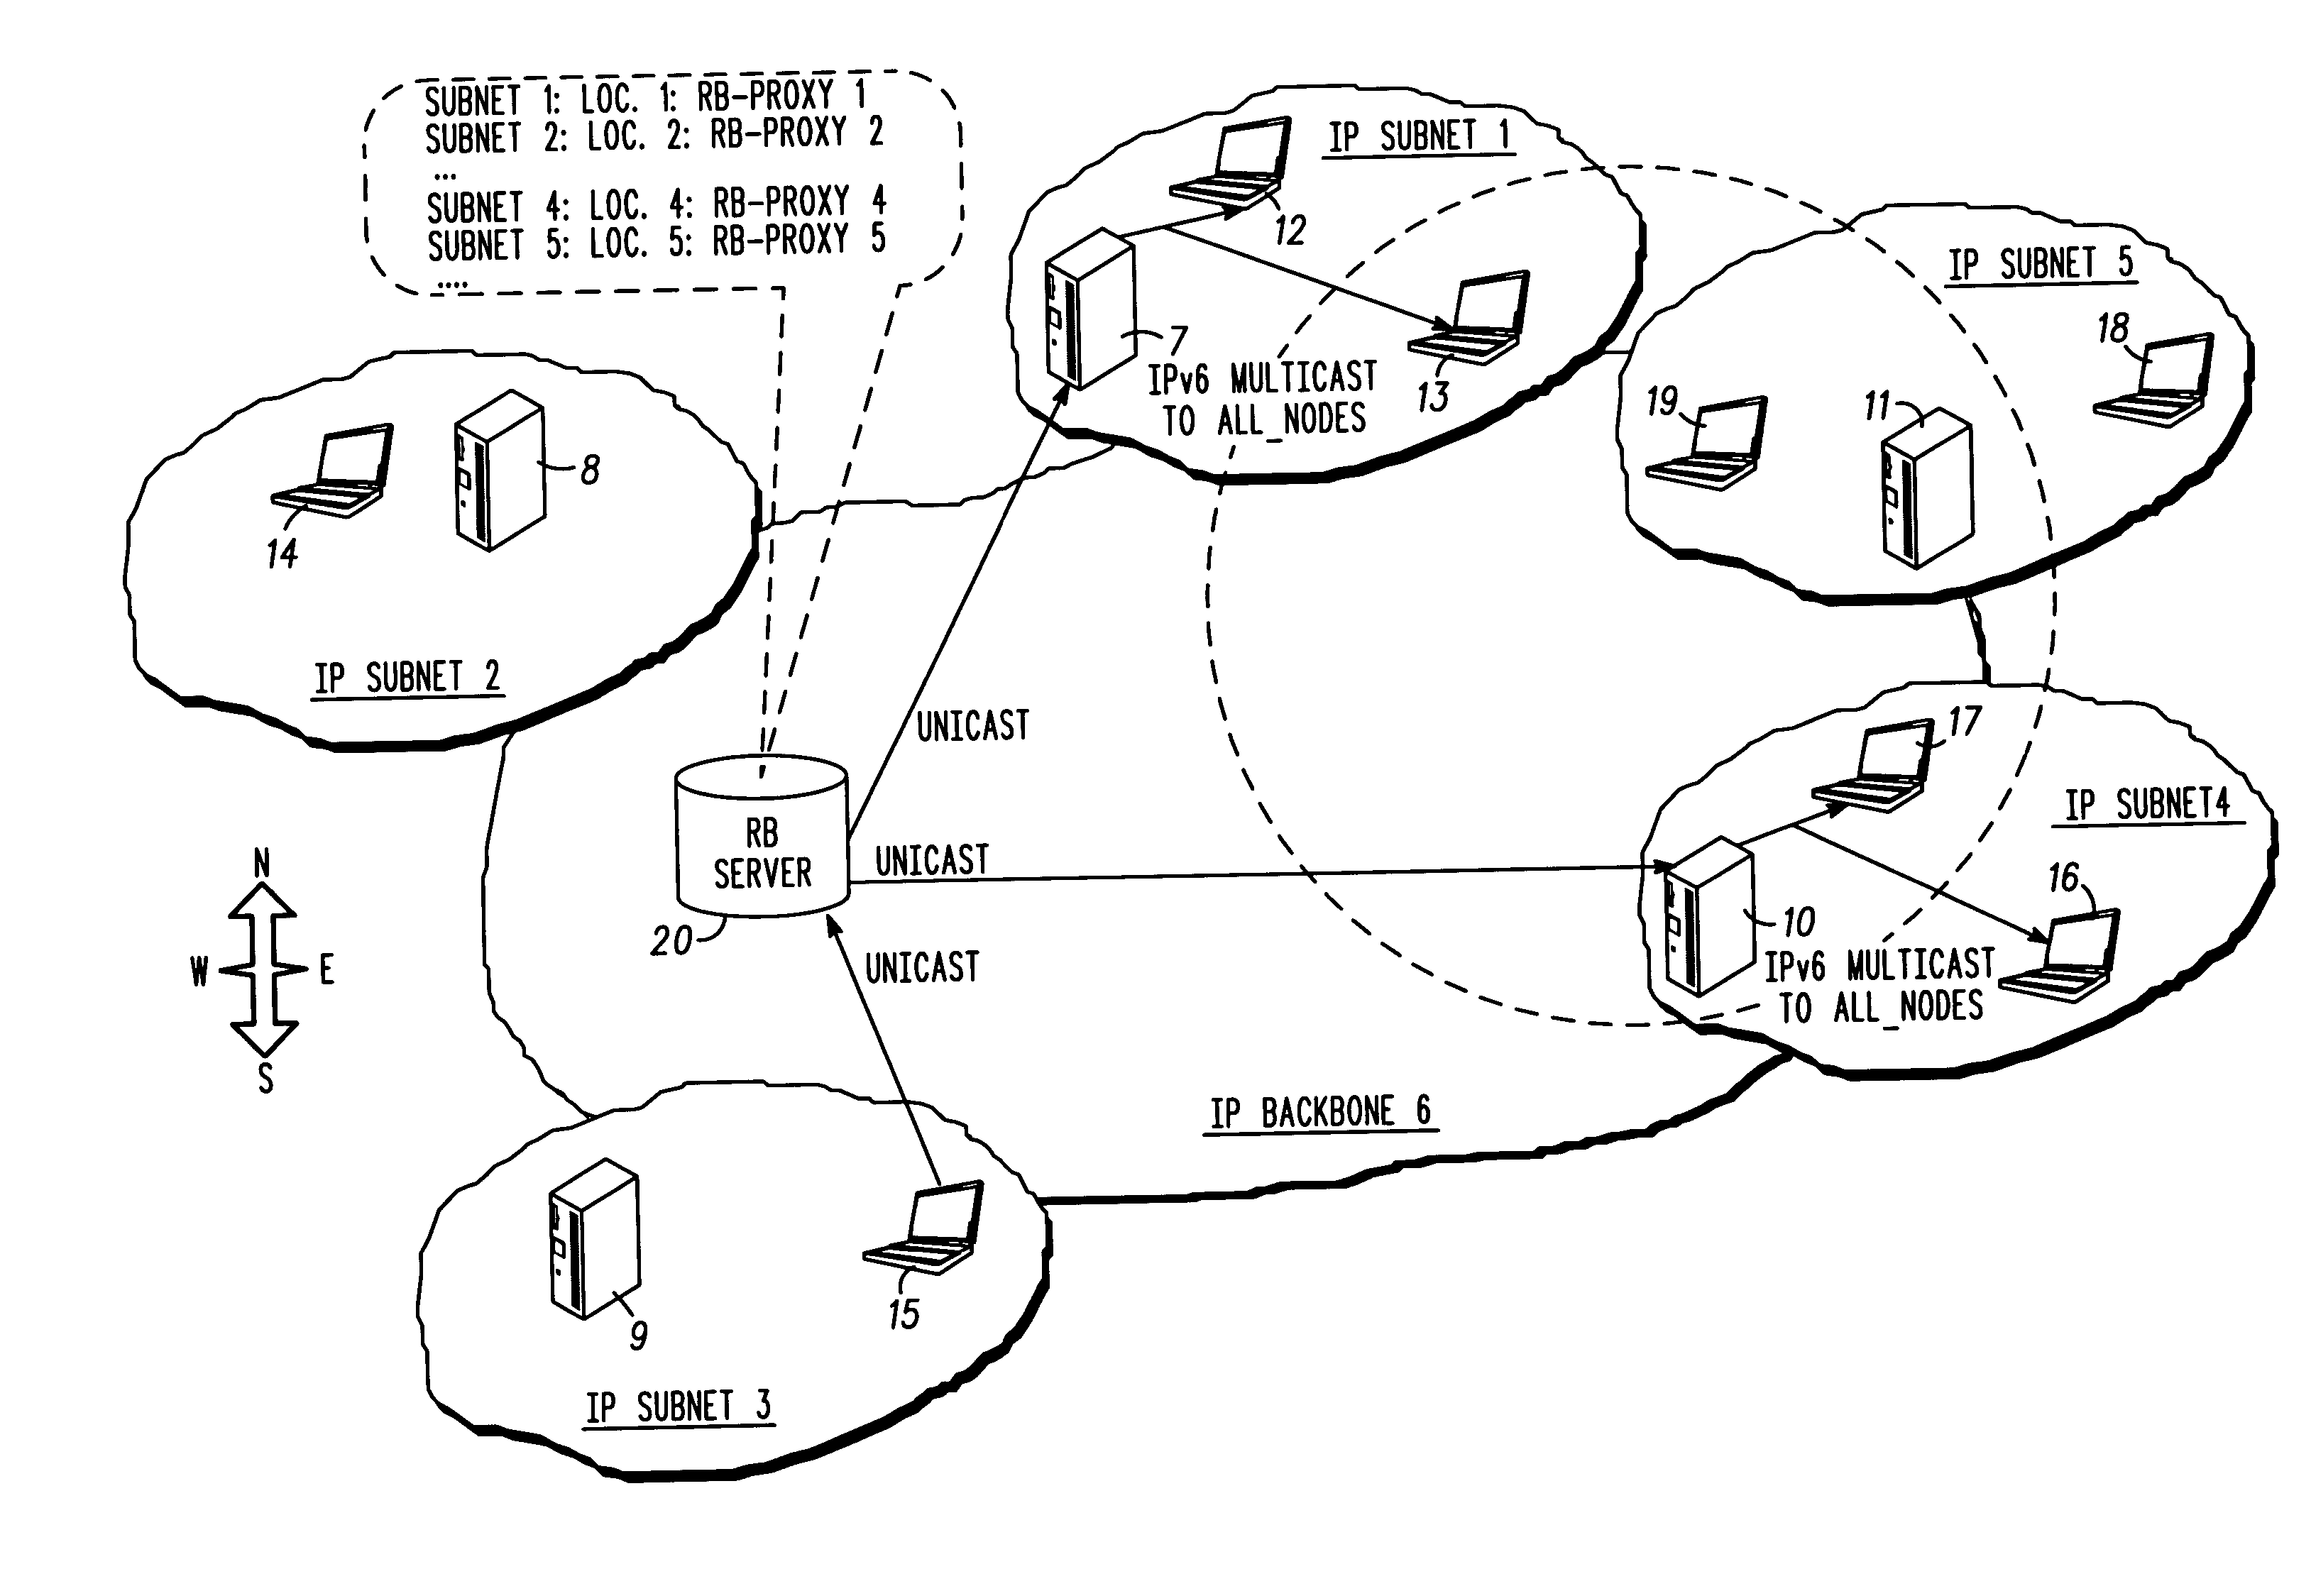 Communication over selected part of a network